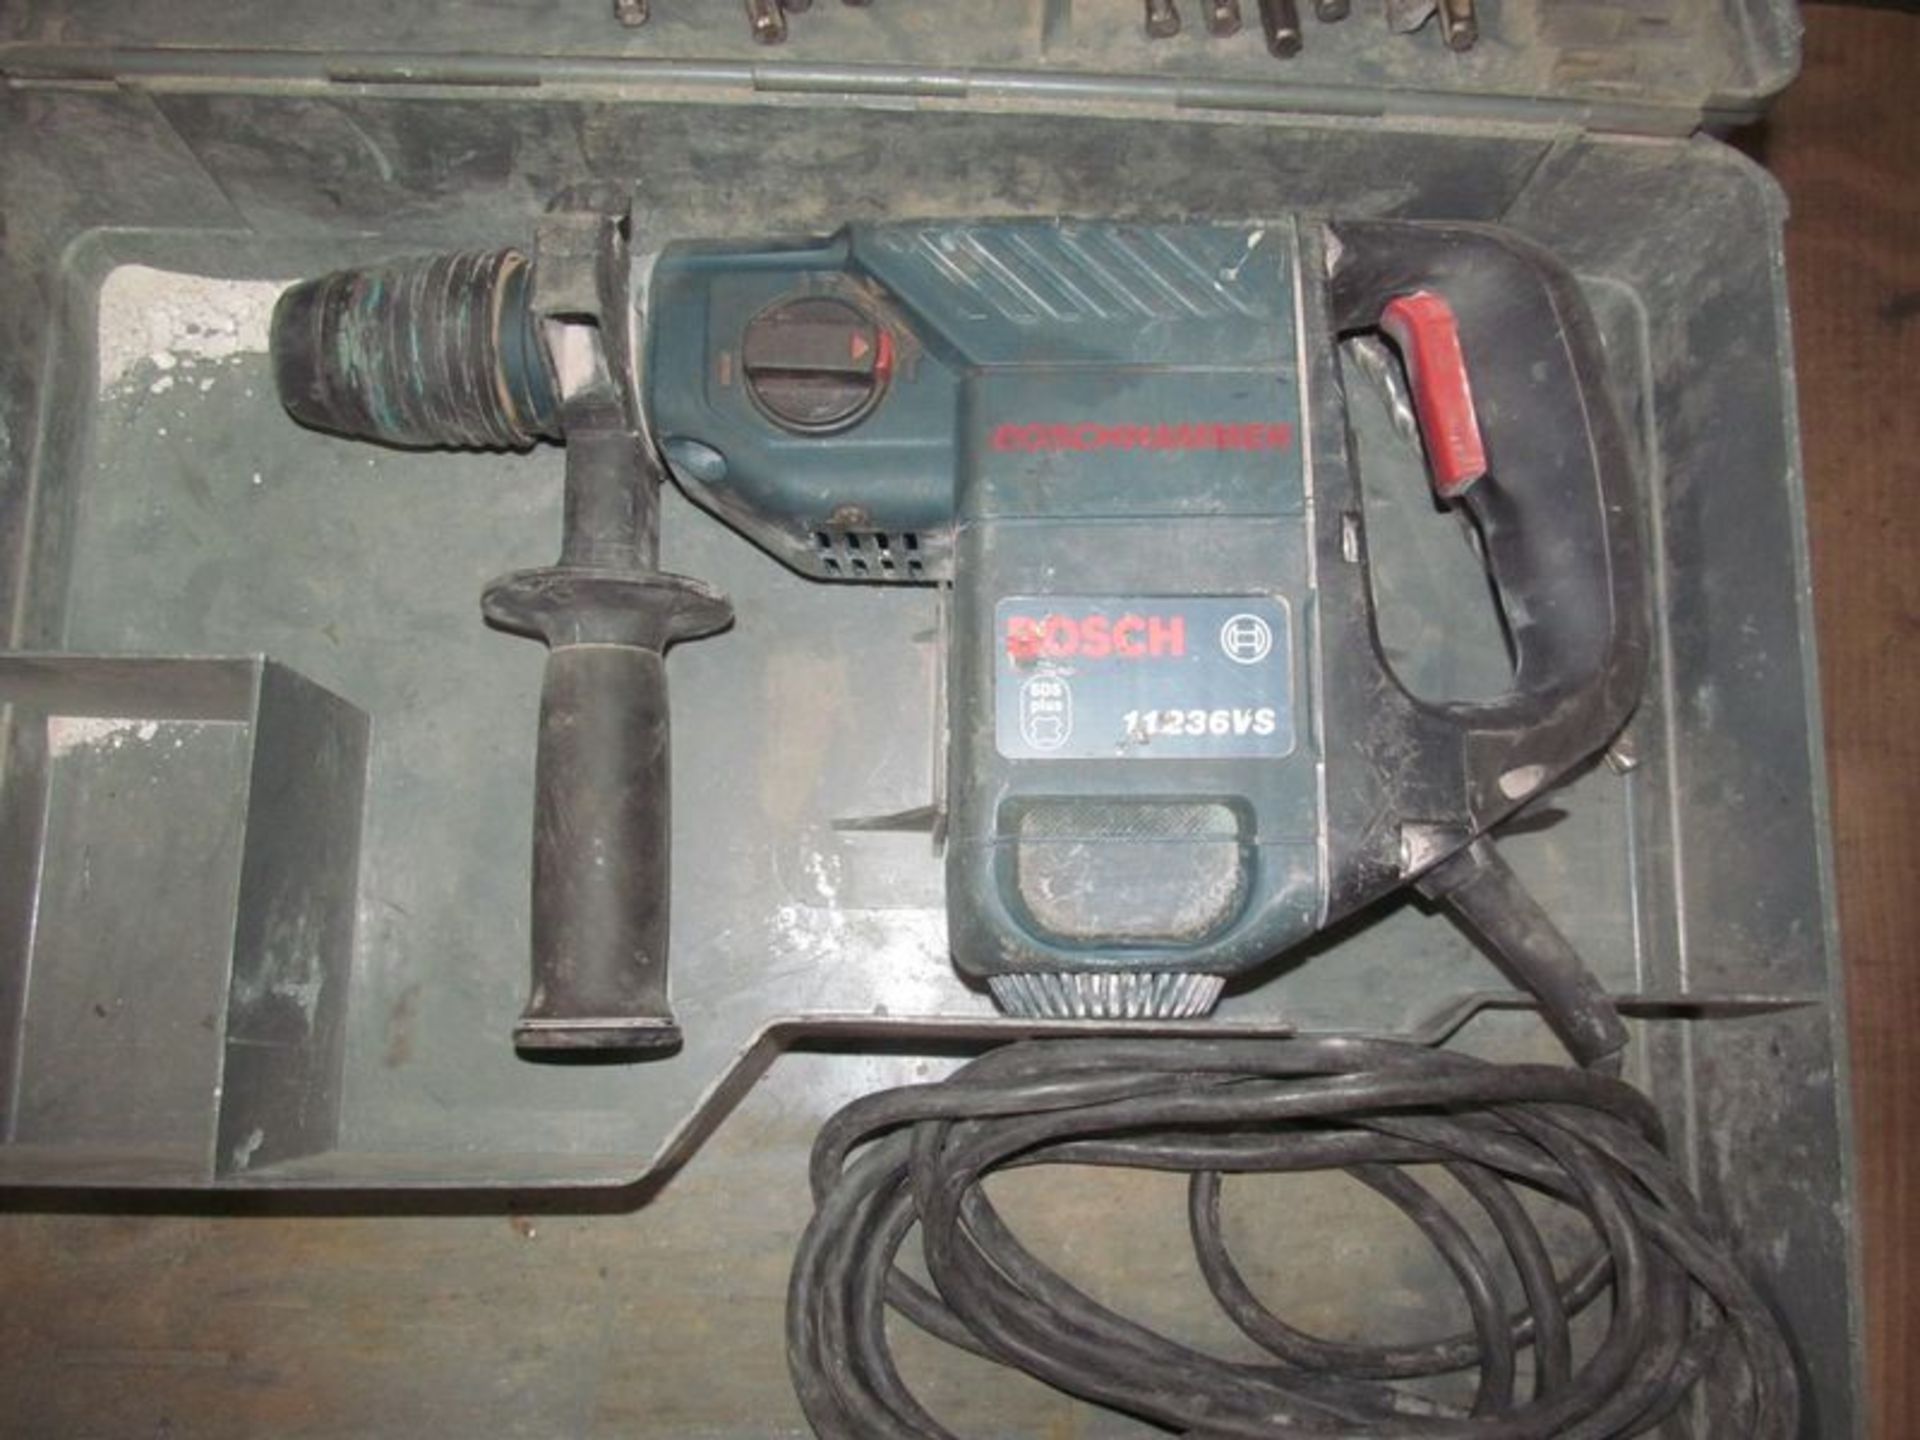 Bosch HD variable speed hammer drill with case, M/N 11236EVS - Image 2 of 3